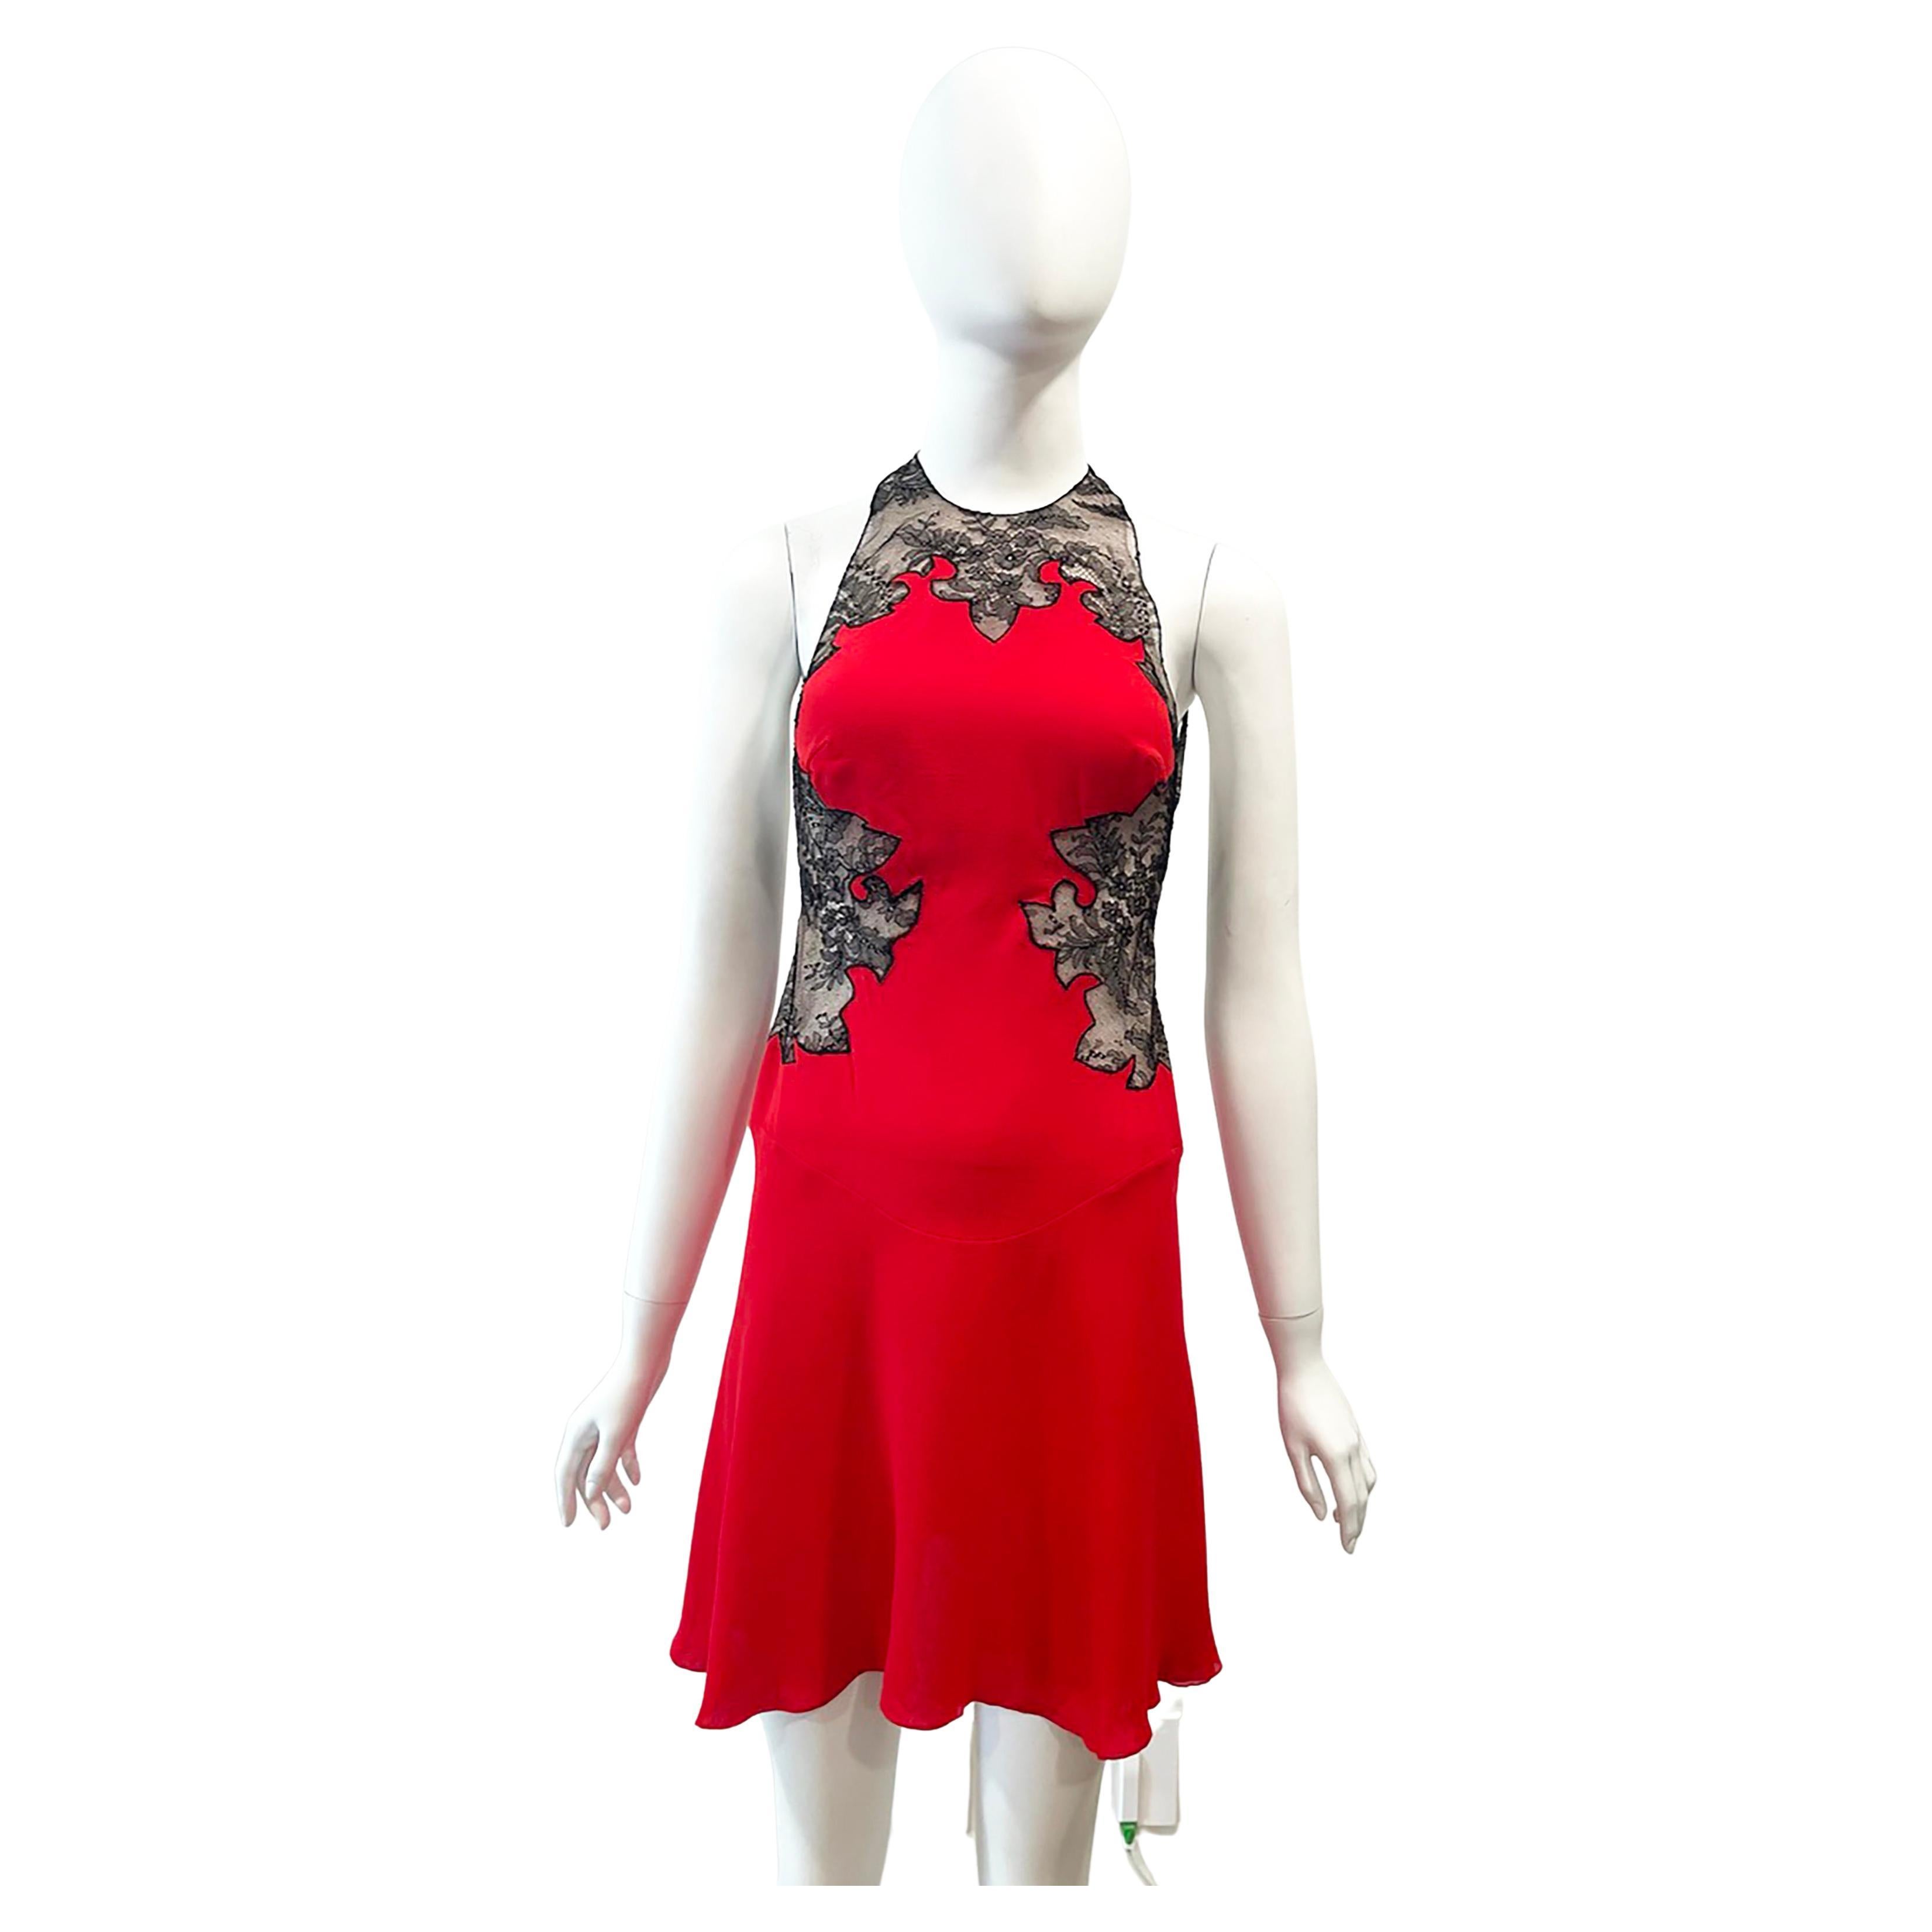 S/S 2002 Gianni Versace Red Mini Dress Sheer With Black Lace Trim For Sale